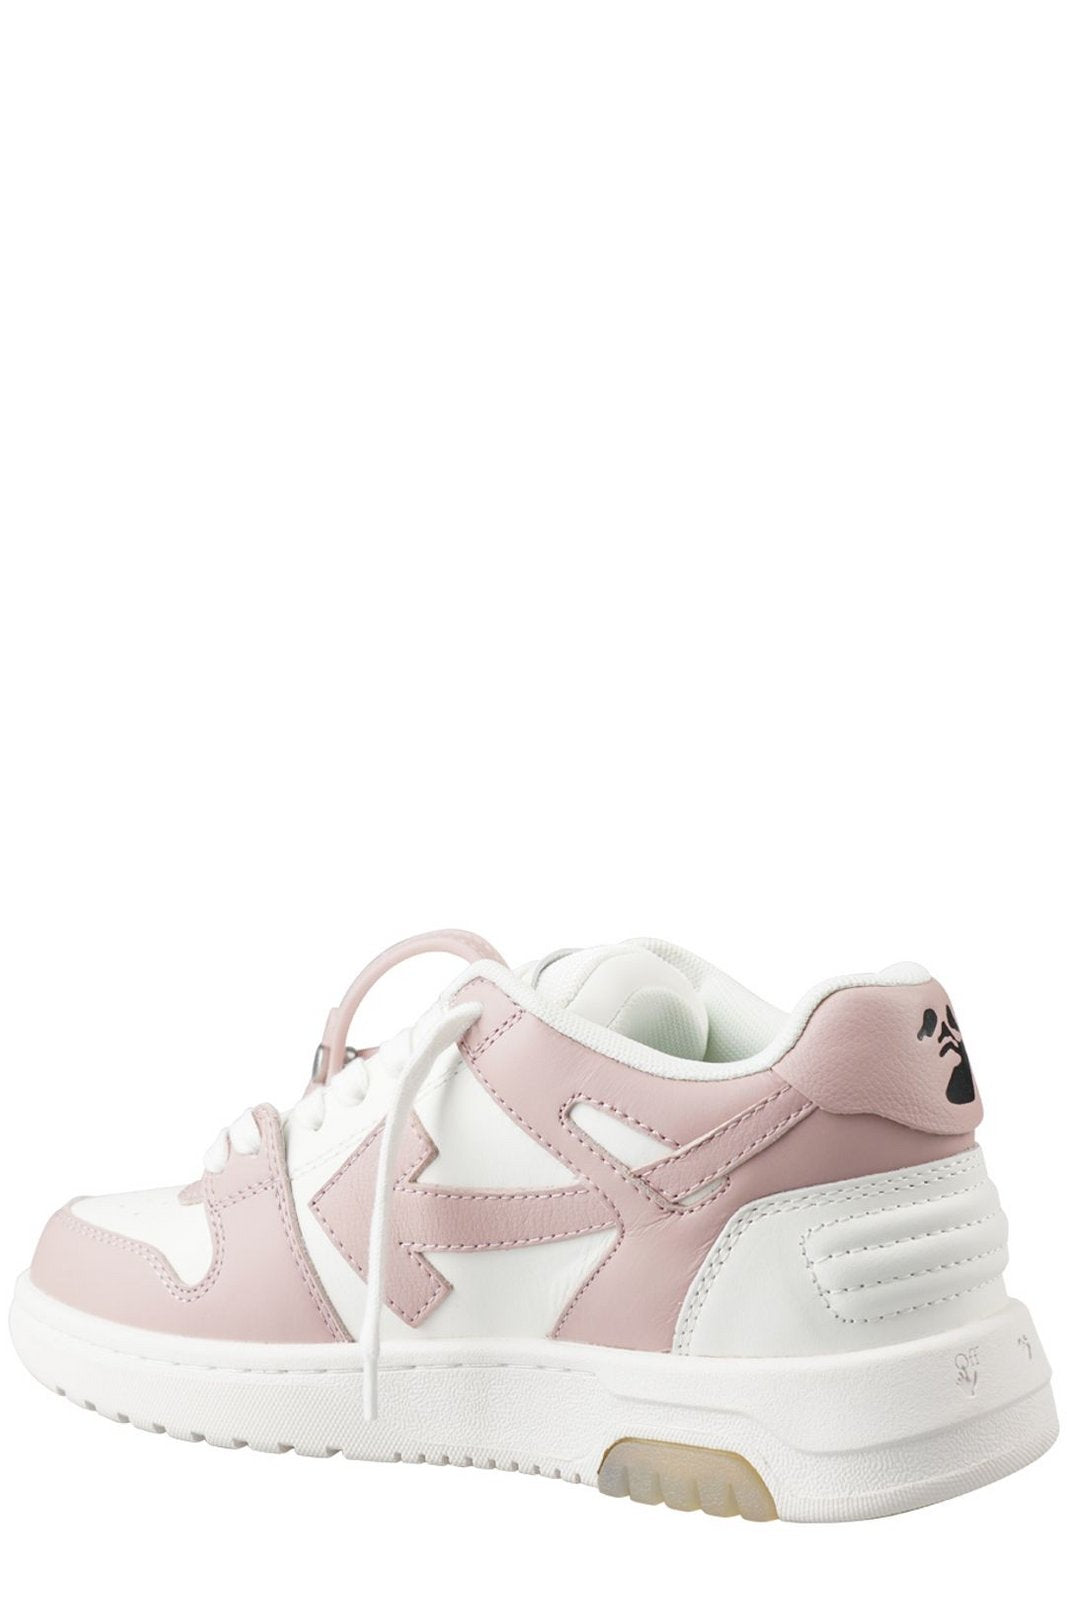 Off-White Out Of Office Round Toe Lace-Up Sneakers